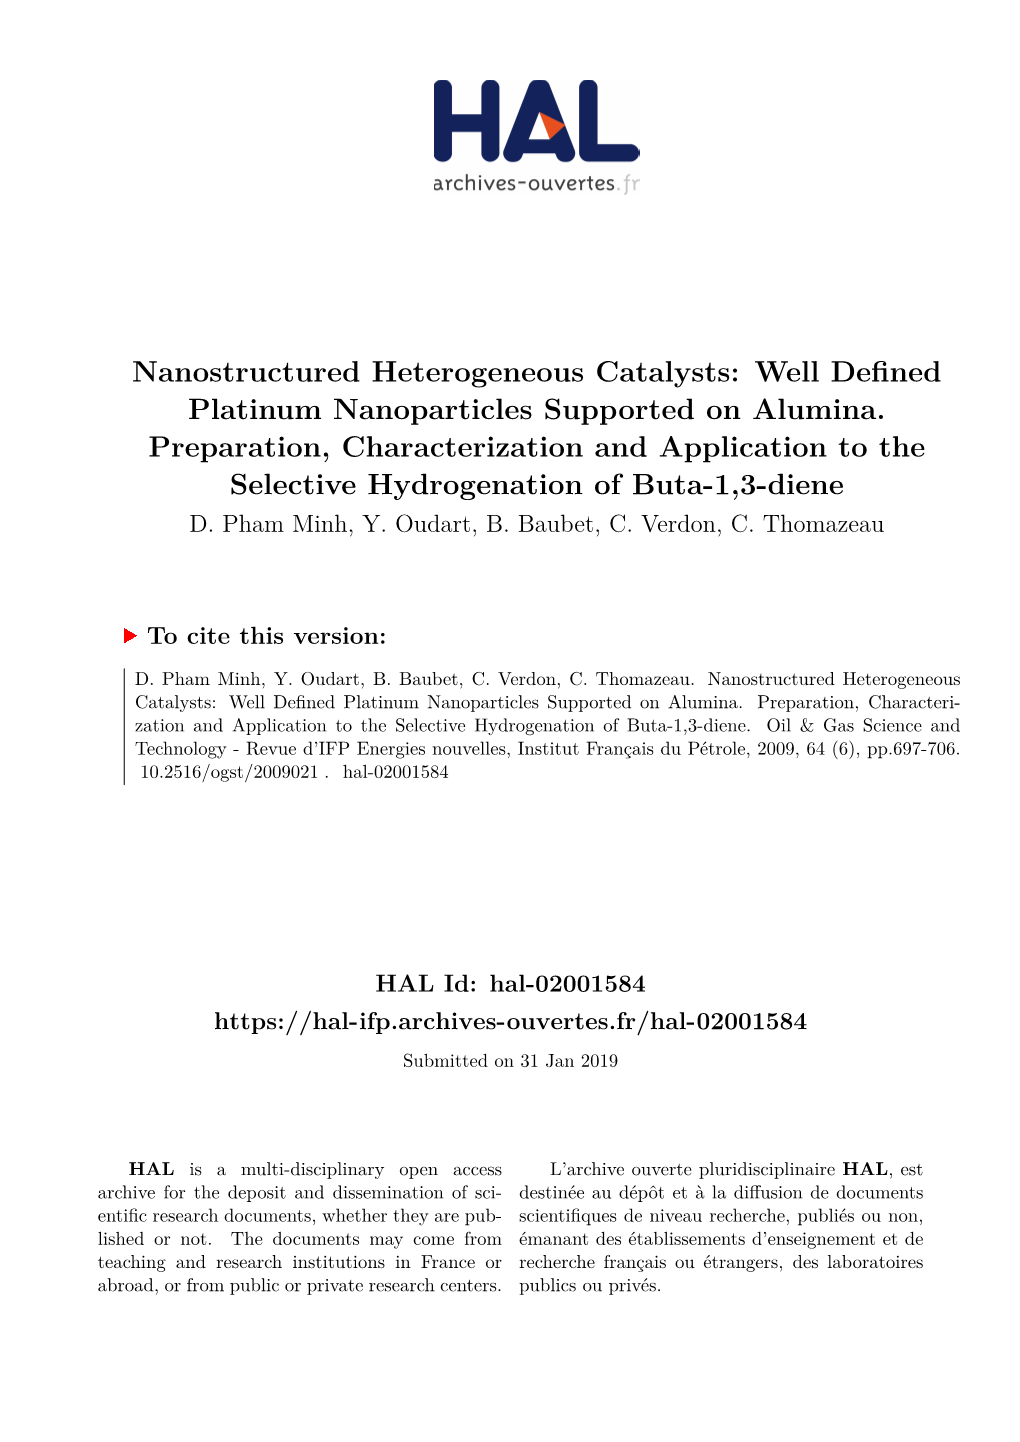 Nanostructured Heterogeneous Catalysts: Well Defined Platinum Nanoparticles Supported on Alumina